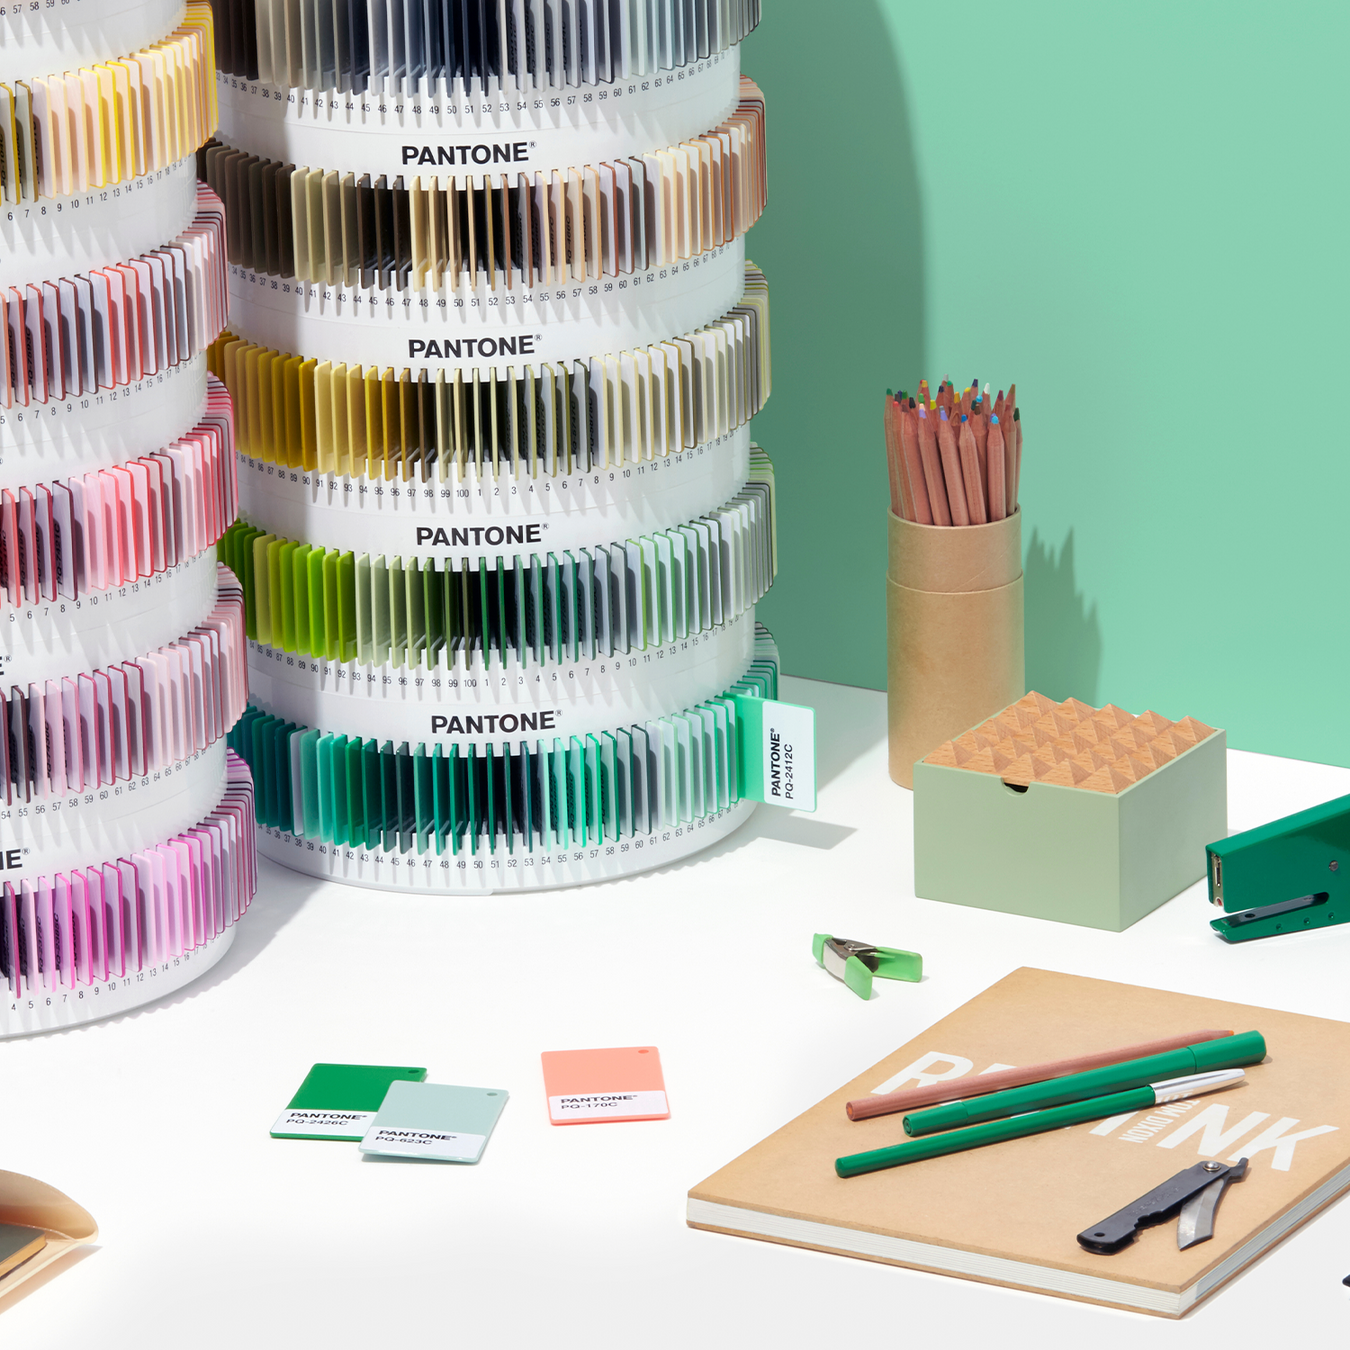 PANTONE for Product Design